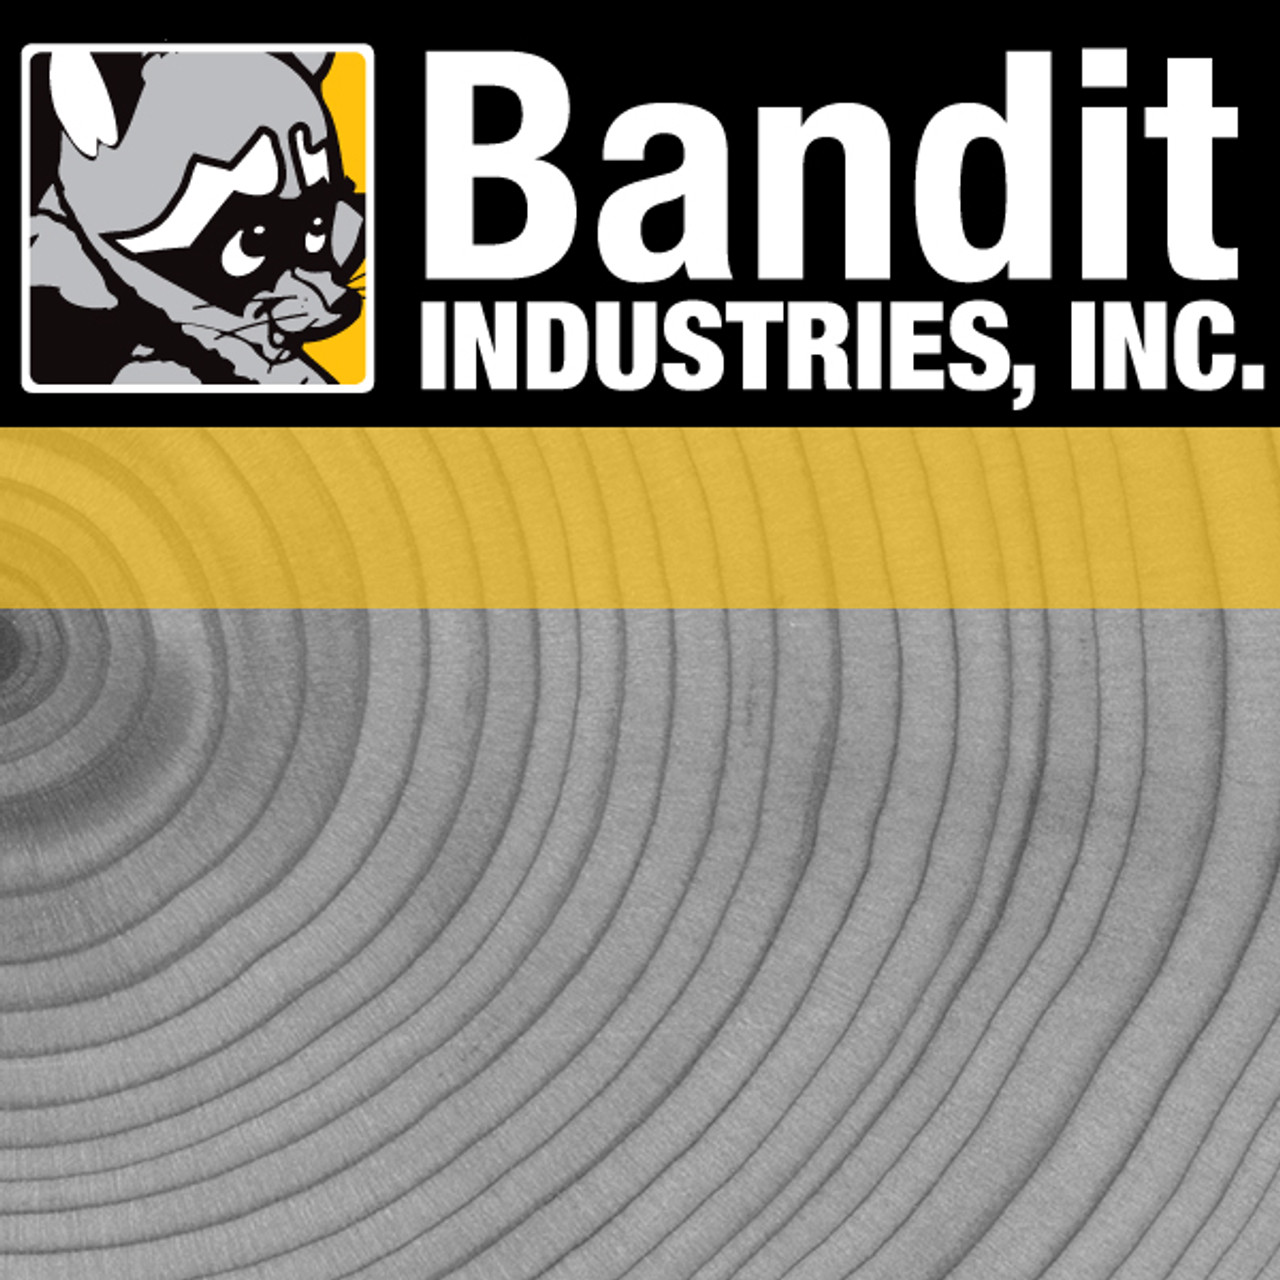 990-101031: BANDIT BOLT ON TANDEM AXLE STEEL FENDERS (TO BE SHIPPED LOOSE